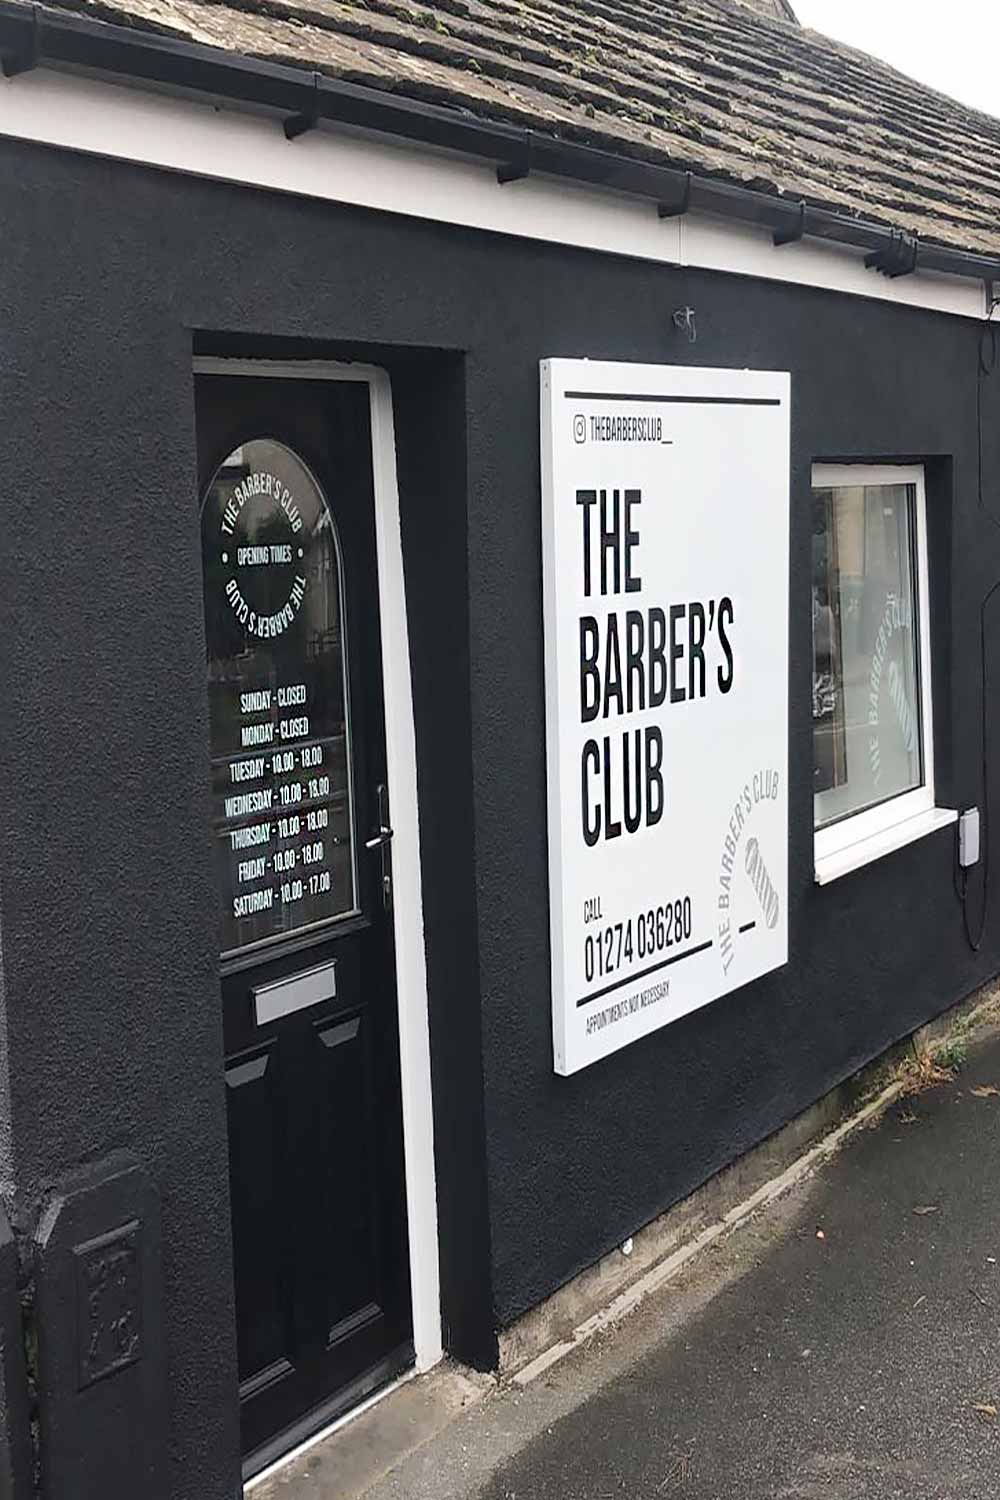 The Barber's Club 2